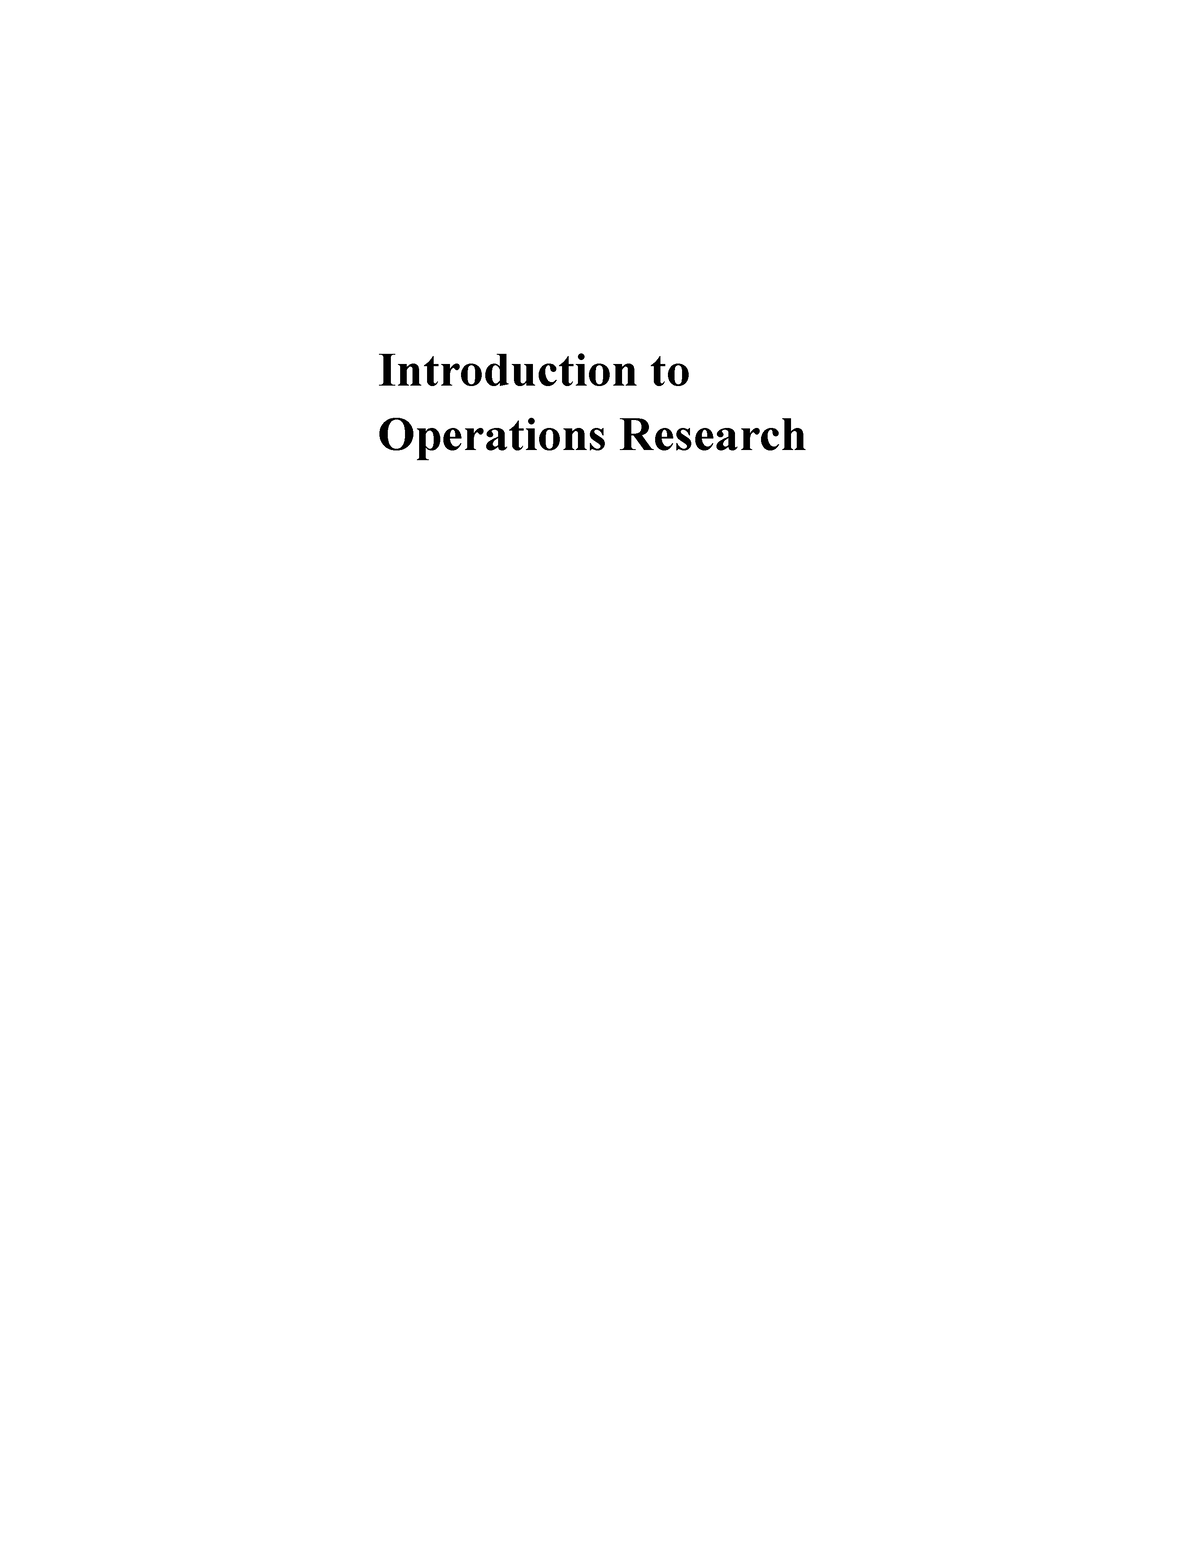 operations research lecture notes pdf free download